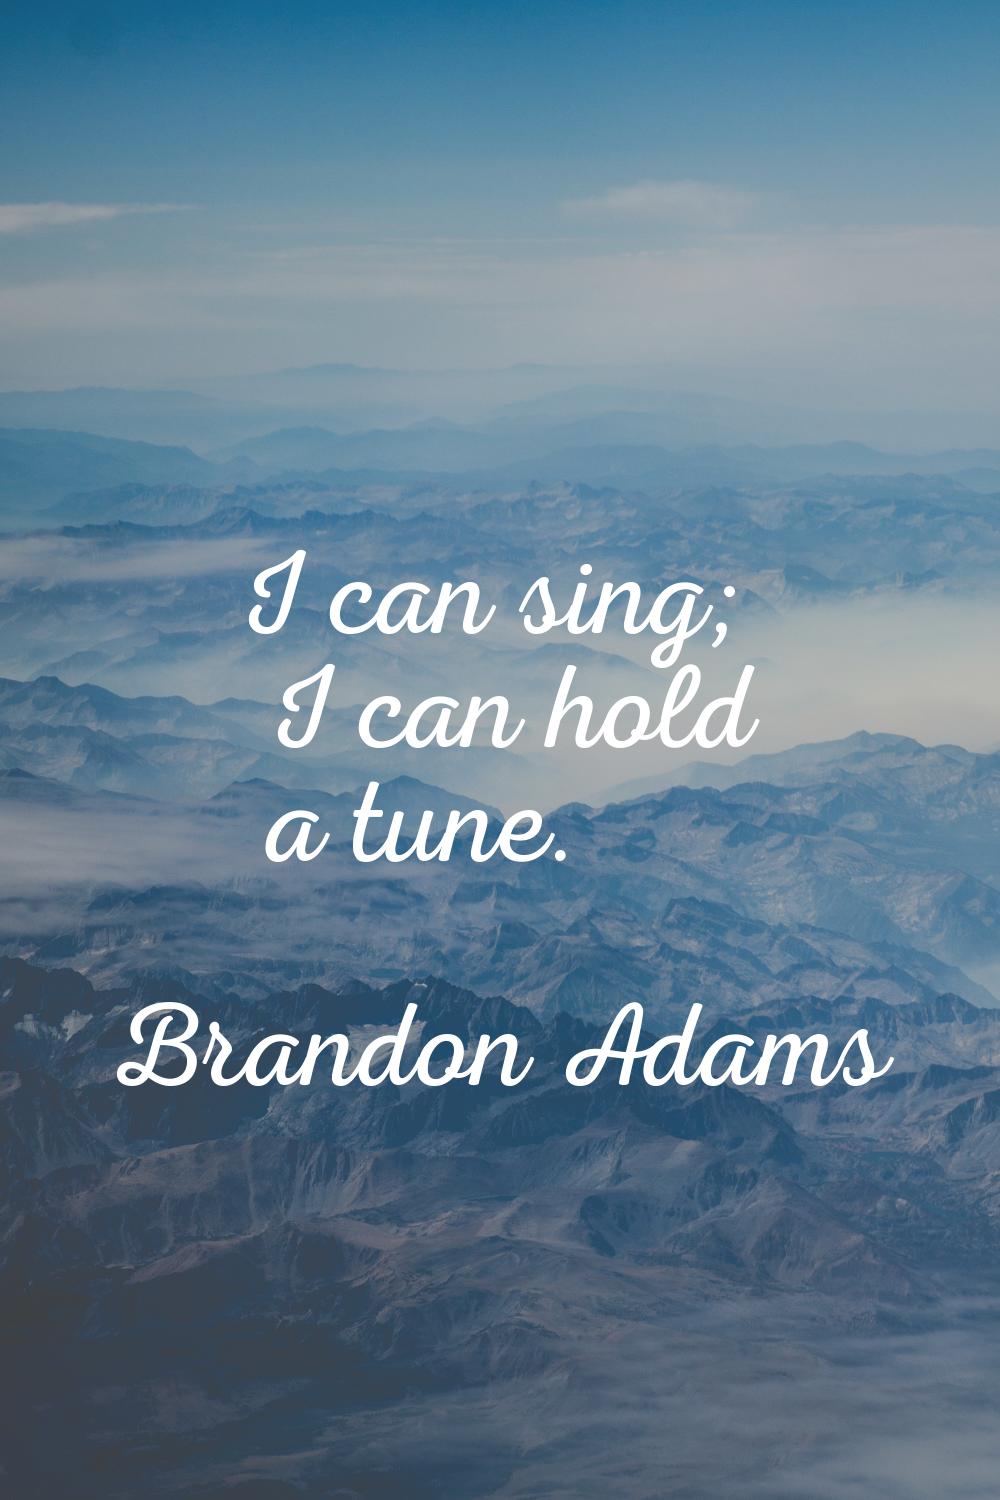 I can sing; I can hold a tune.